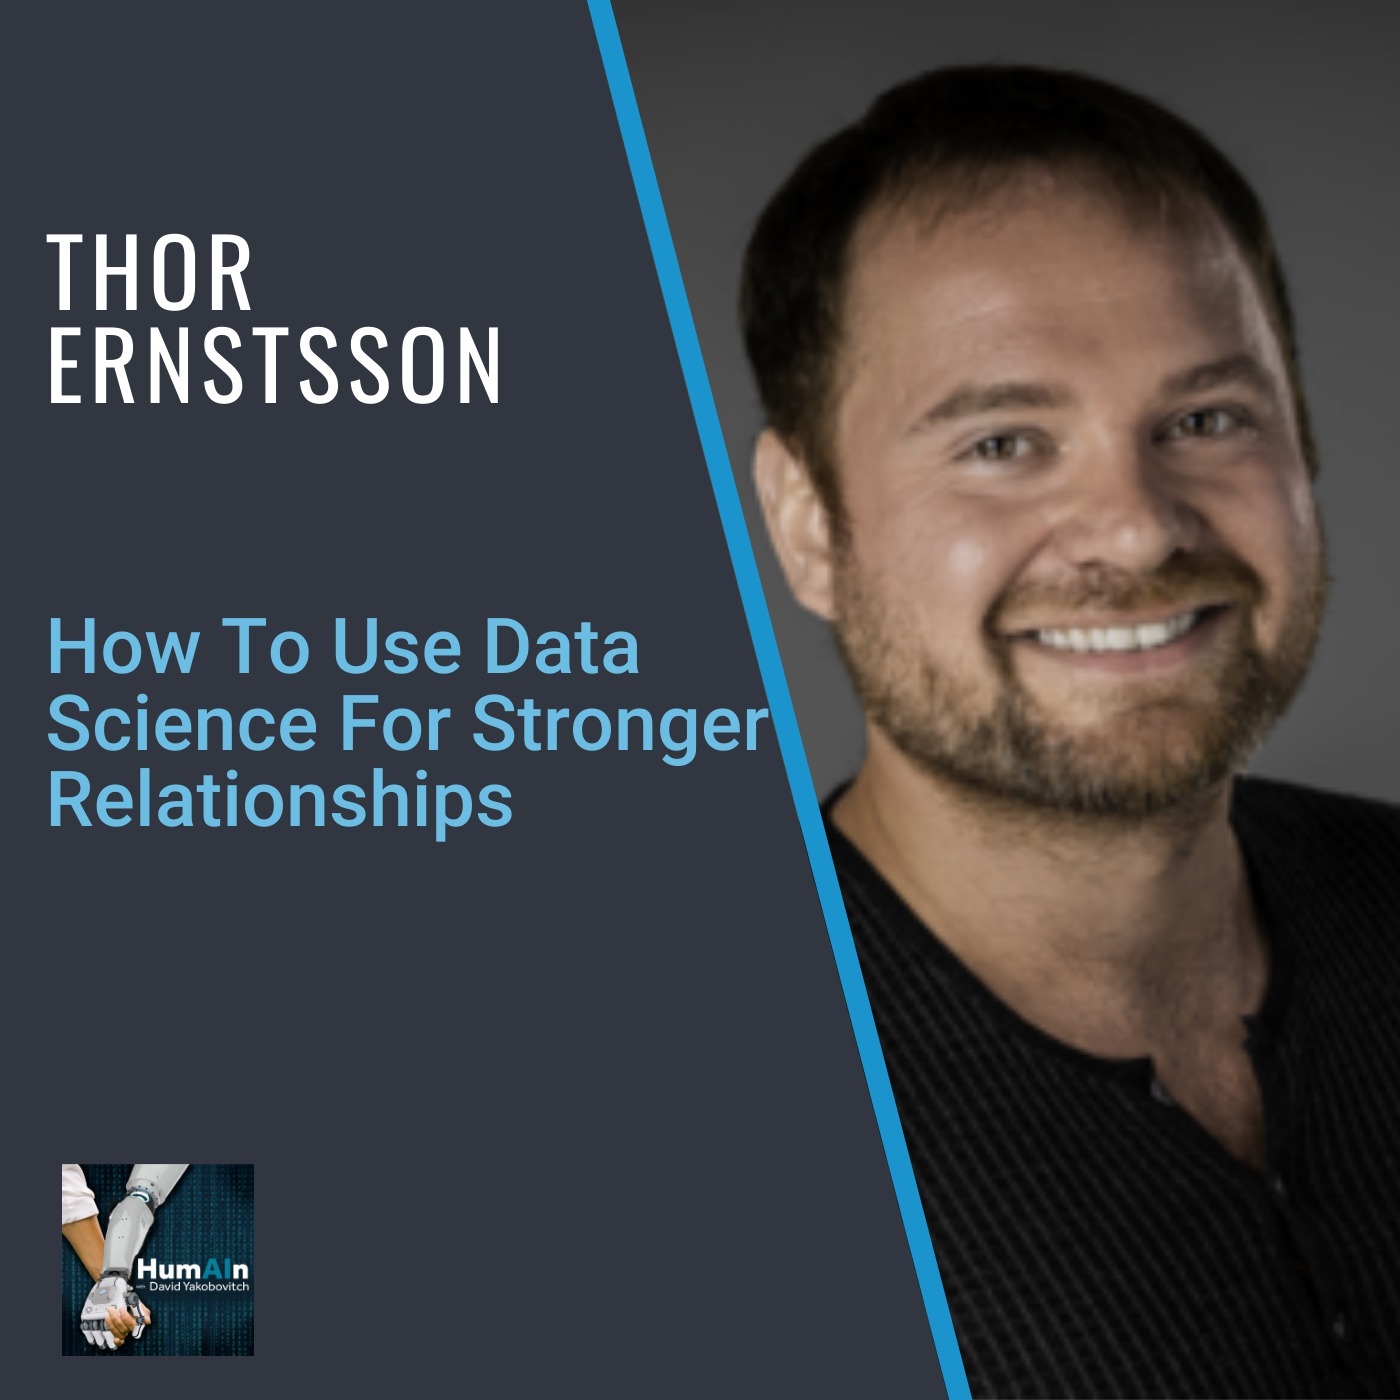 Thor Ernstsson: How To Use Data Science for Stronger Relationships